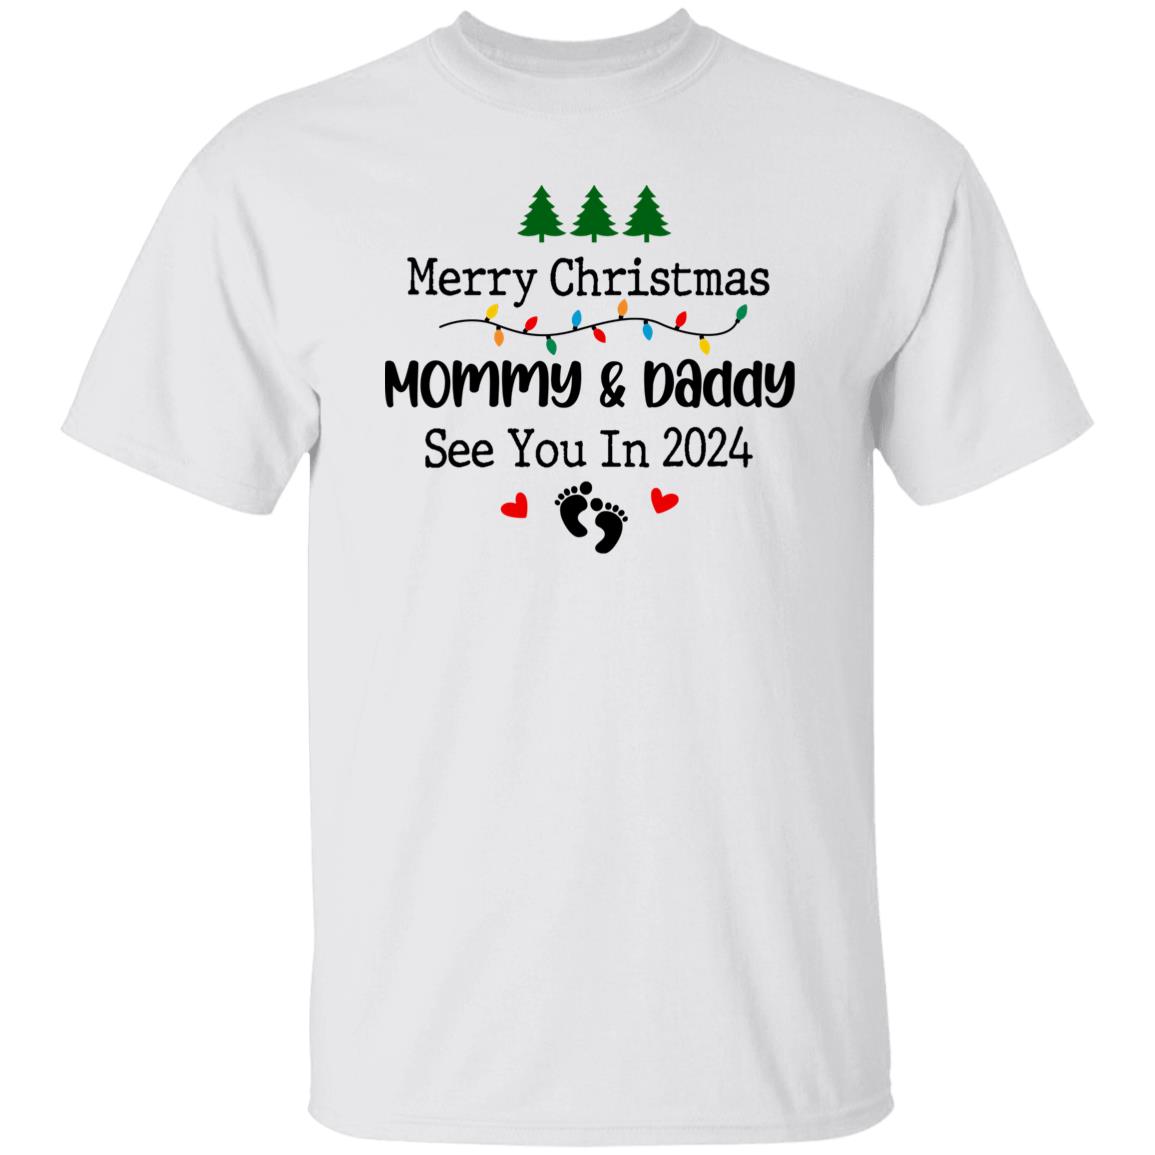 https://albertocerriteno.com/wp-content/uploads/2023/11/merry-christmas-mommy-and-daddy-see-you-in-2024-shirt.jpg